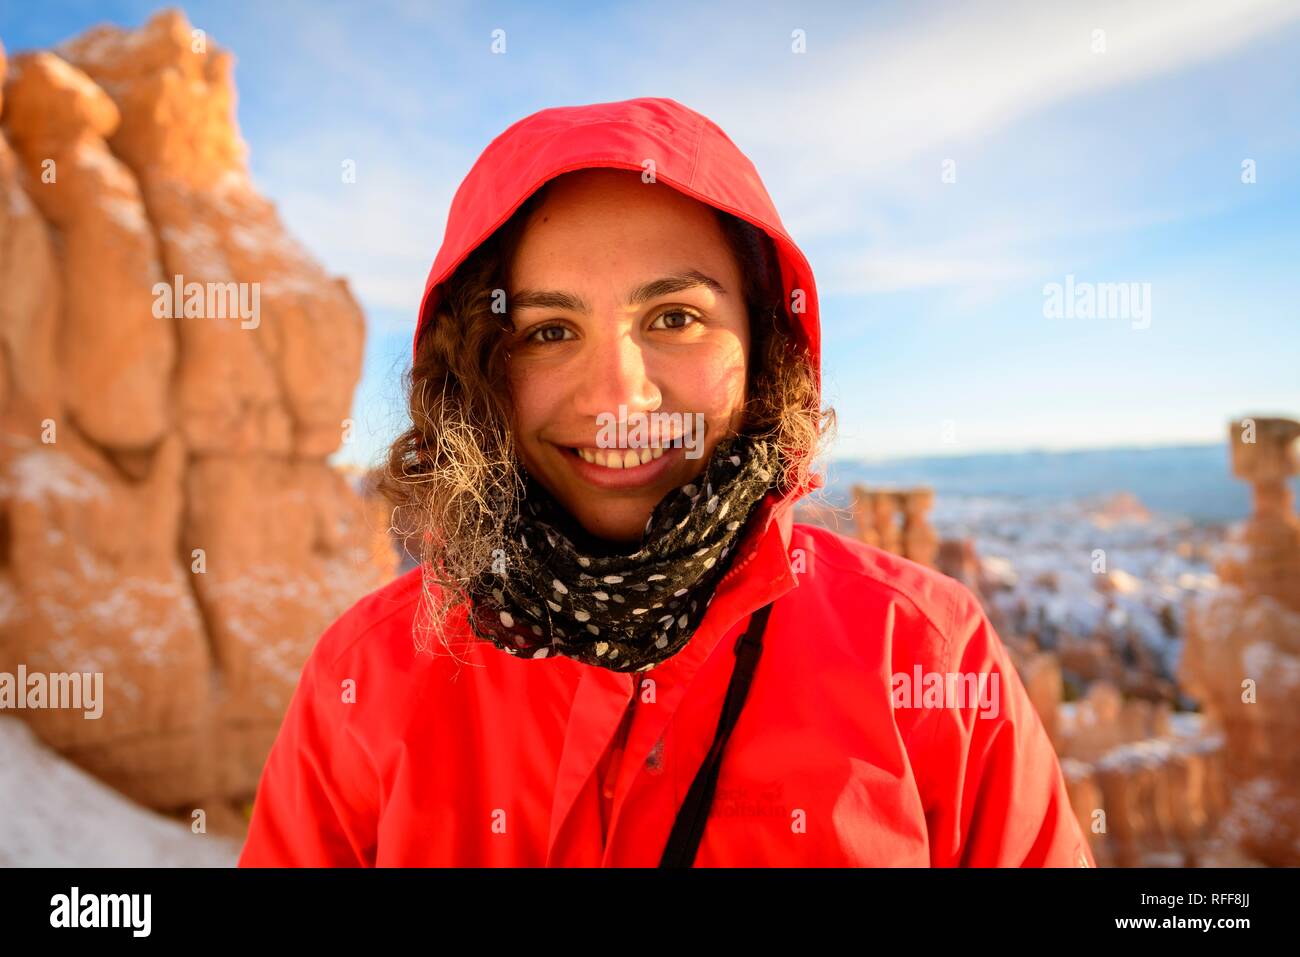 Portrait of a pretty young woman in winter clothes in front of rock needles, Winter, Rim Trail, Bryce Canyon National Park, Utah Stock Photo